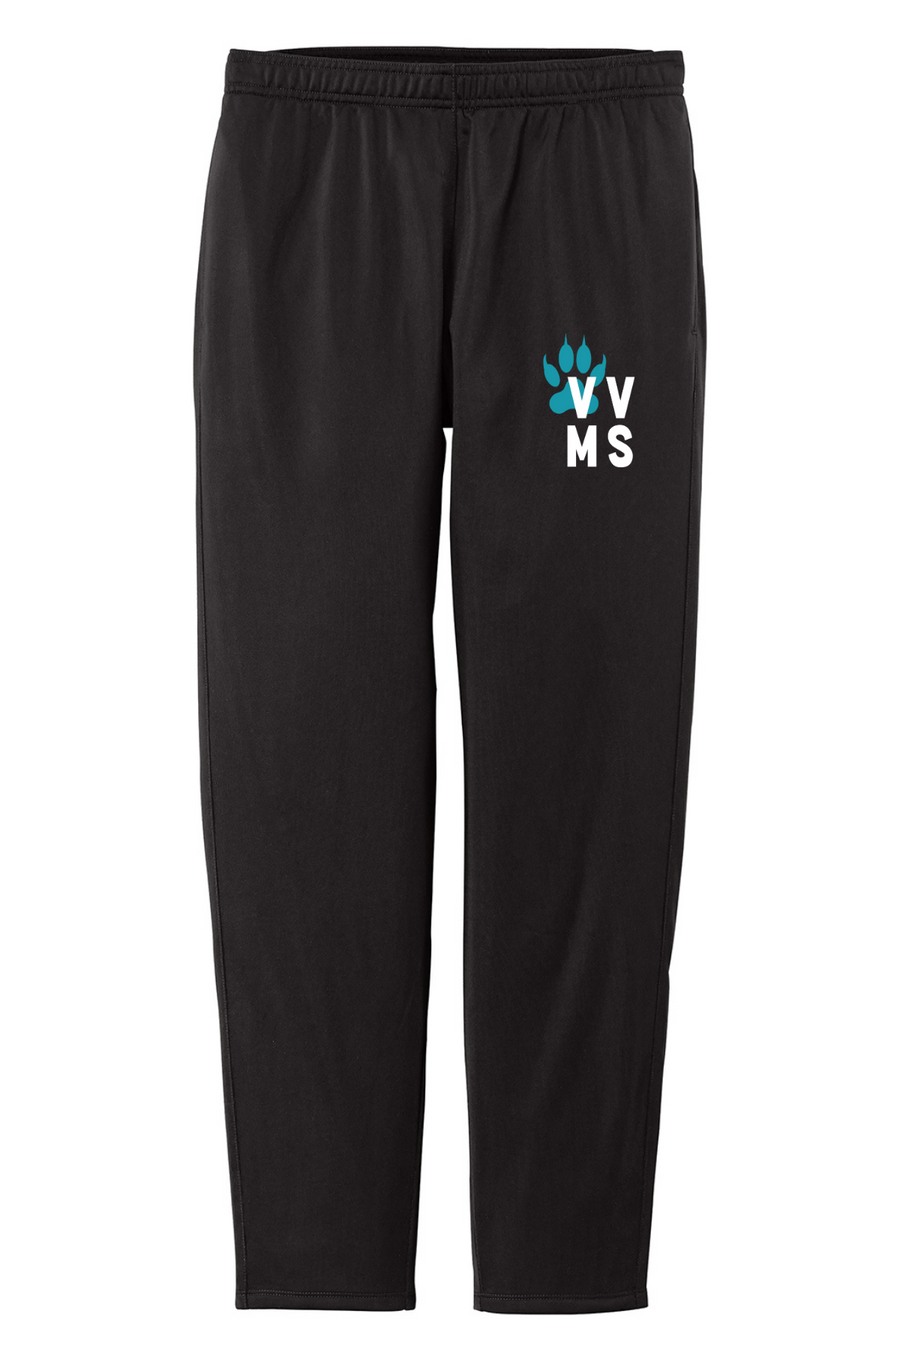 Valley View Middle School On-Demand-Sport-Tek Ladies Tricot Track Jogger VVMS